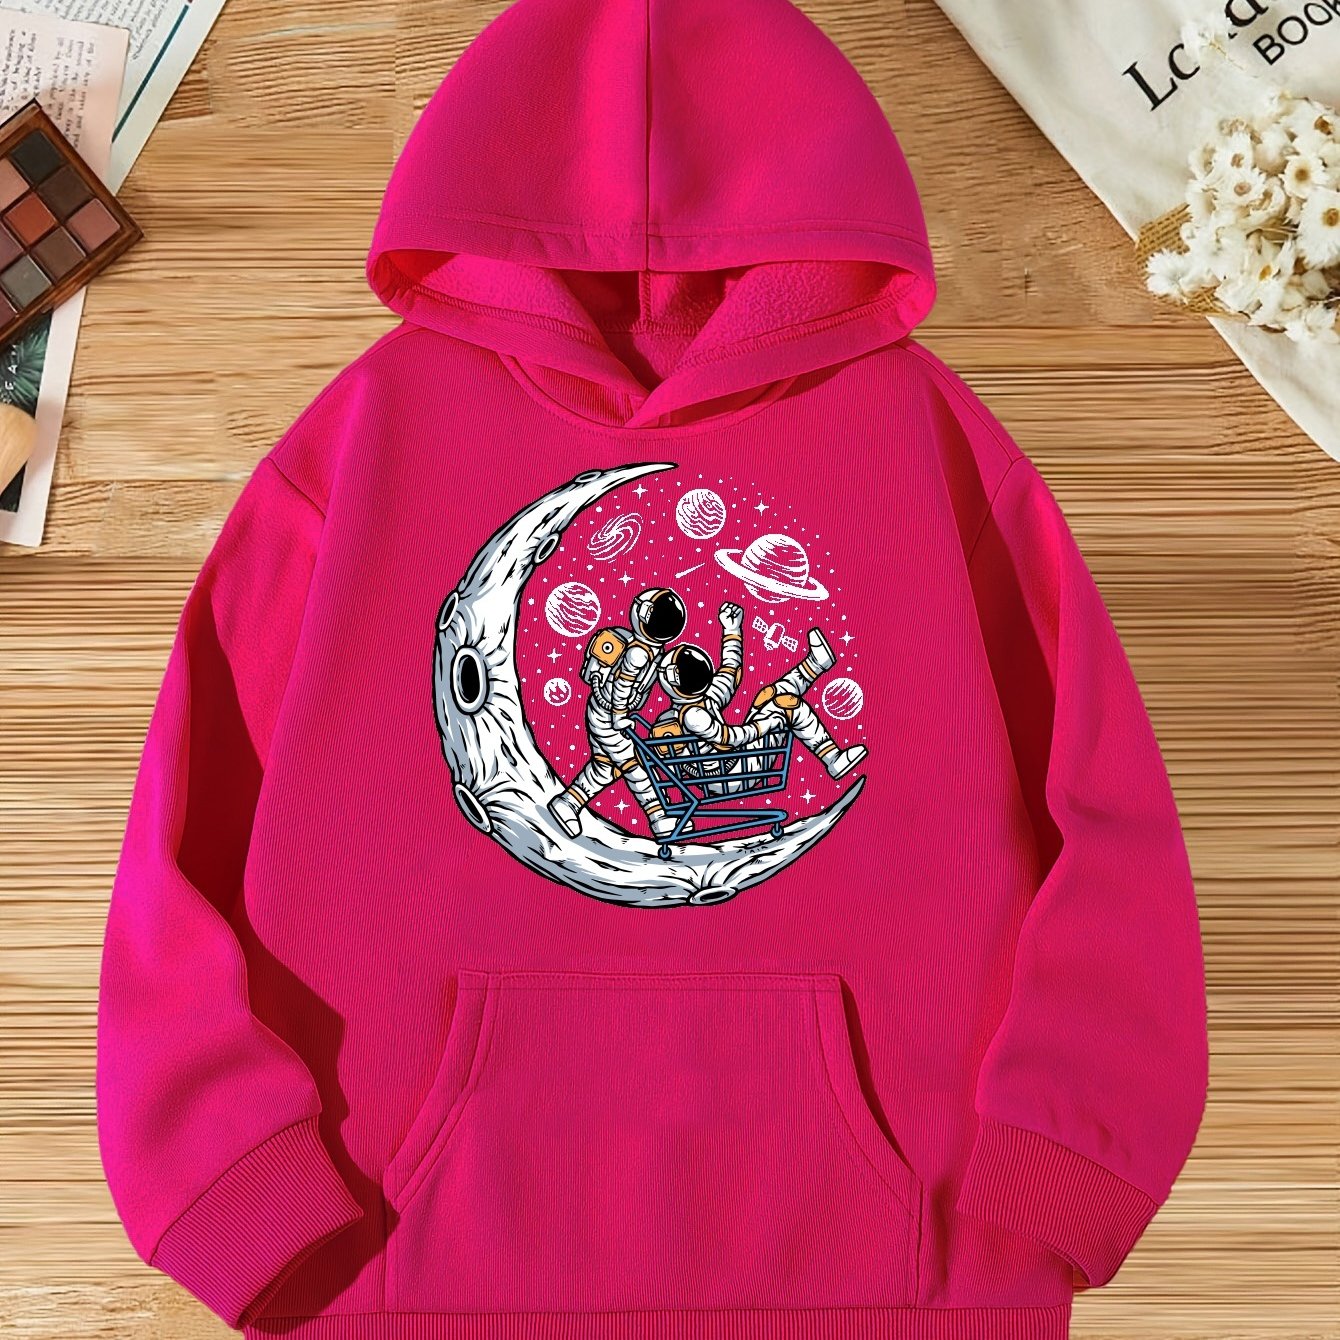 Astronauts In A Shopping Cart'' Graphic Girls Hoodies, Trendy Long Sleeve  Hooded Sweatshirt Tops, Kids Clothes